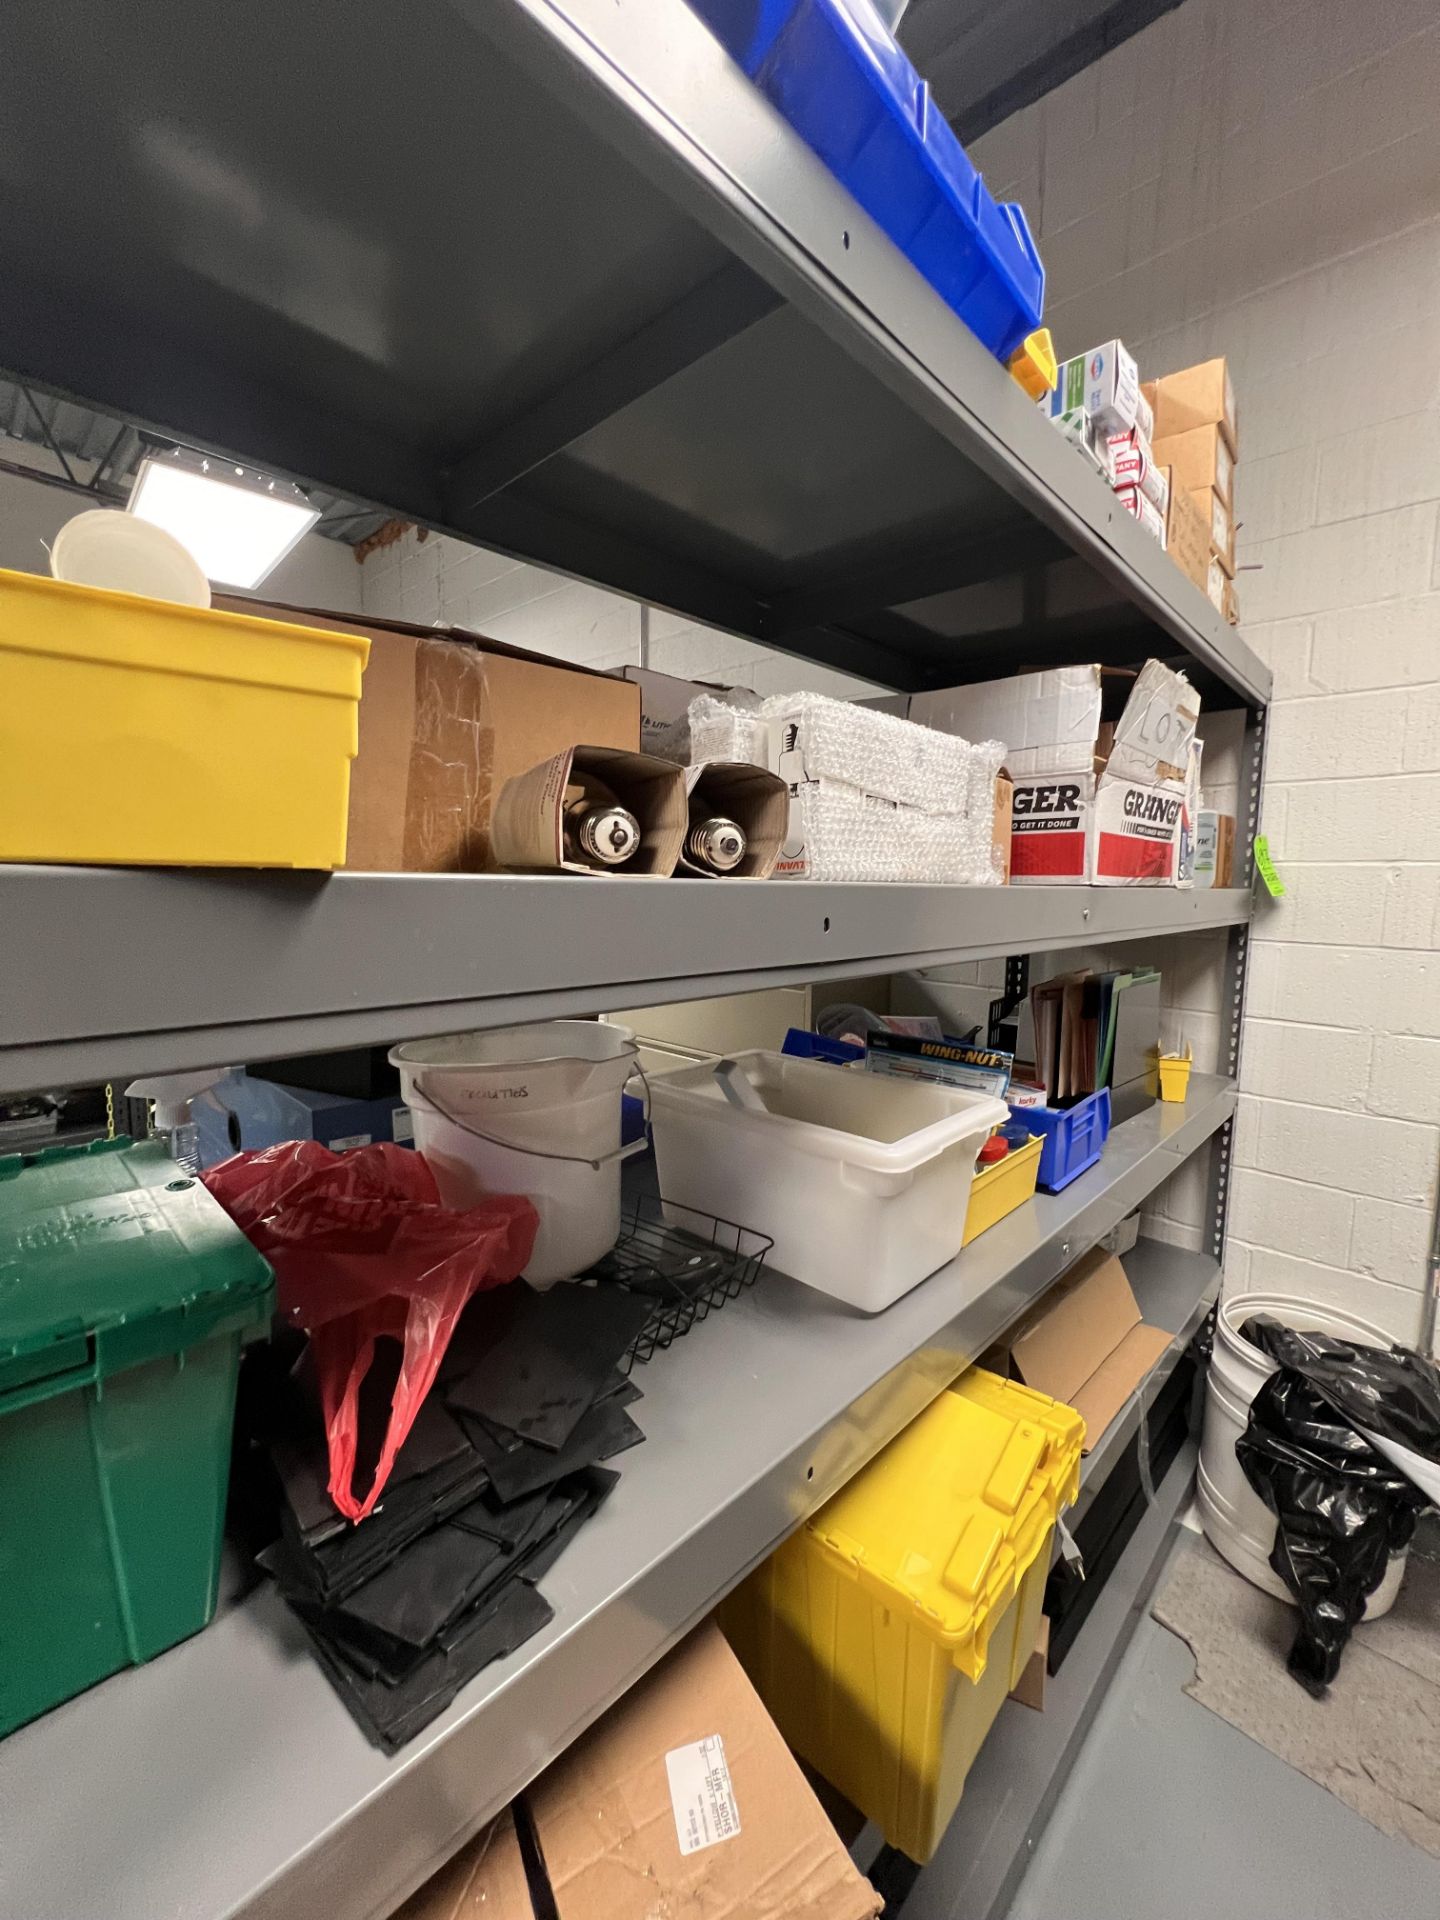 METAL RACK WITH CONTENTS, INCLUDES FACILITIES MANAGEMENT EQUIPMENT EXIT SIGNS, SALINE EYE WASH, - Image 11 of 23